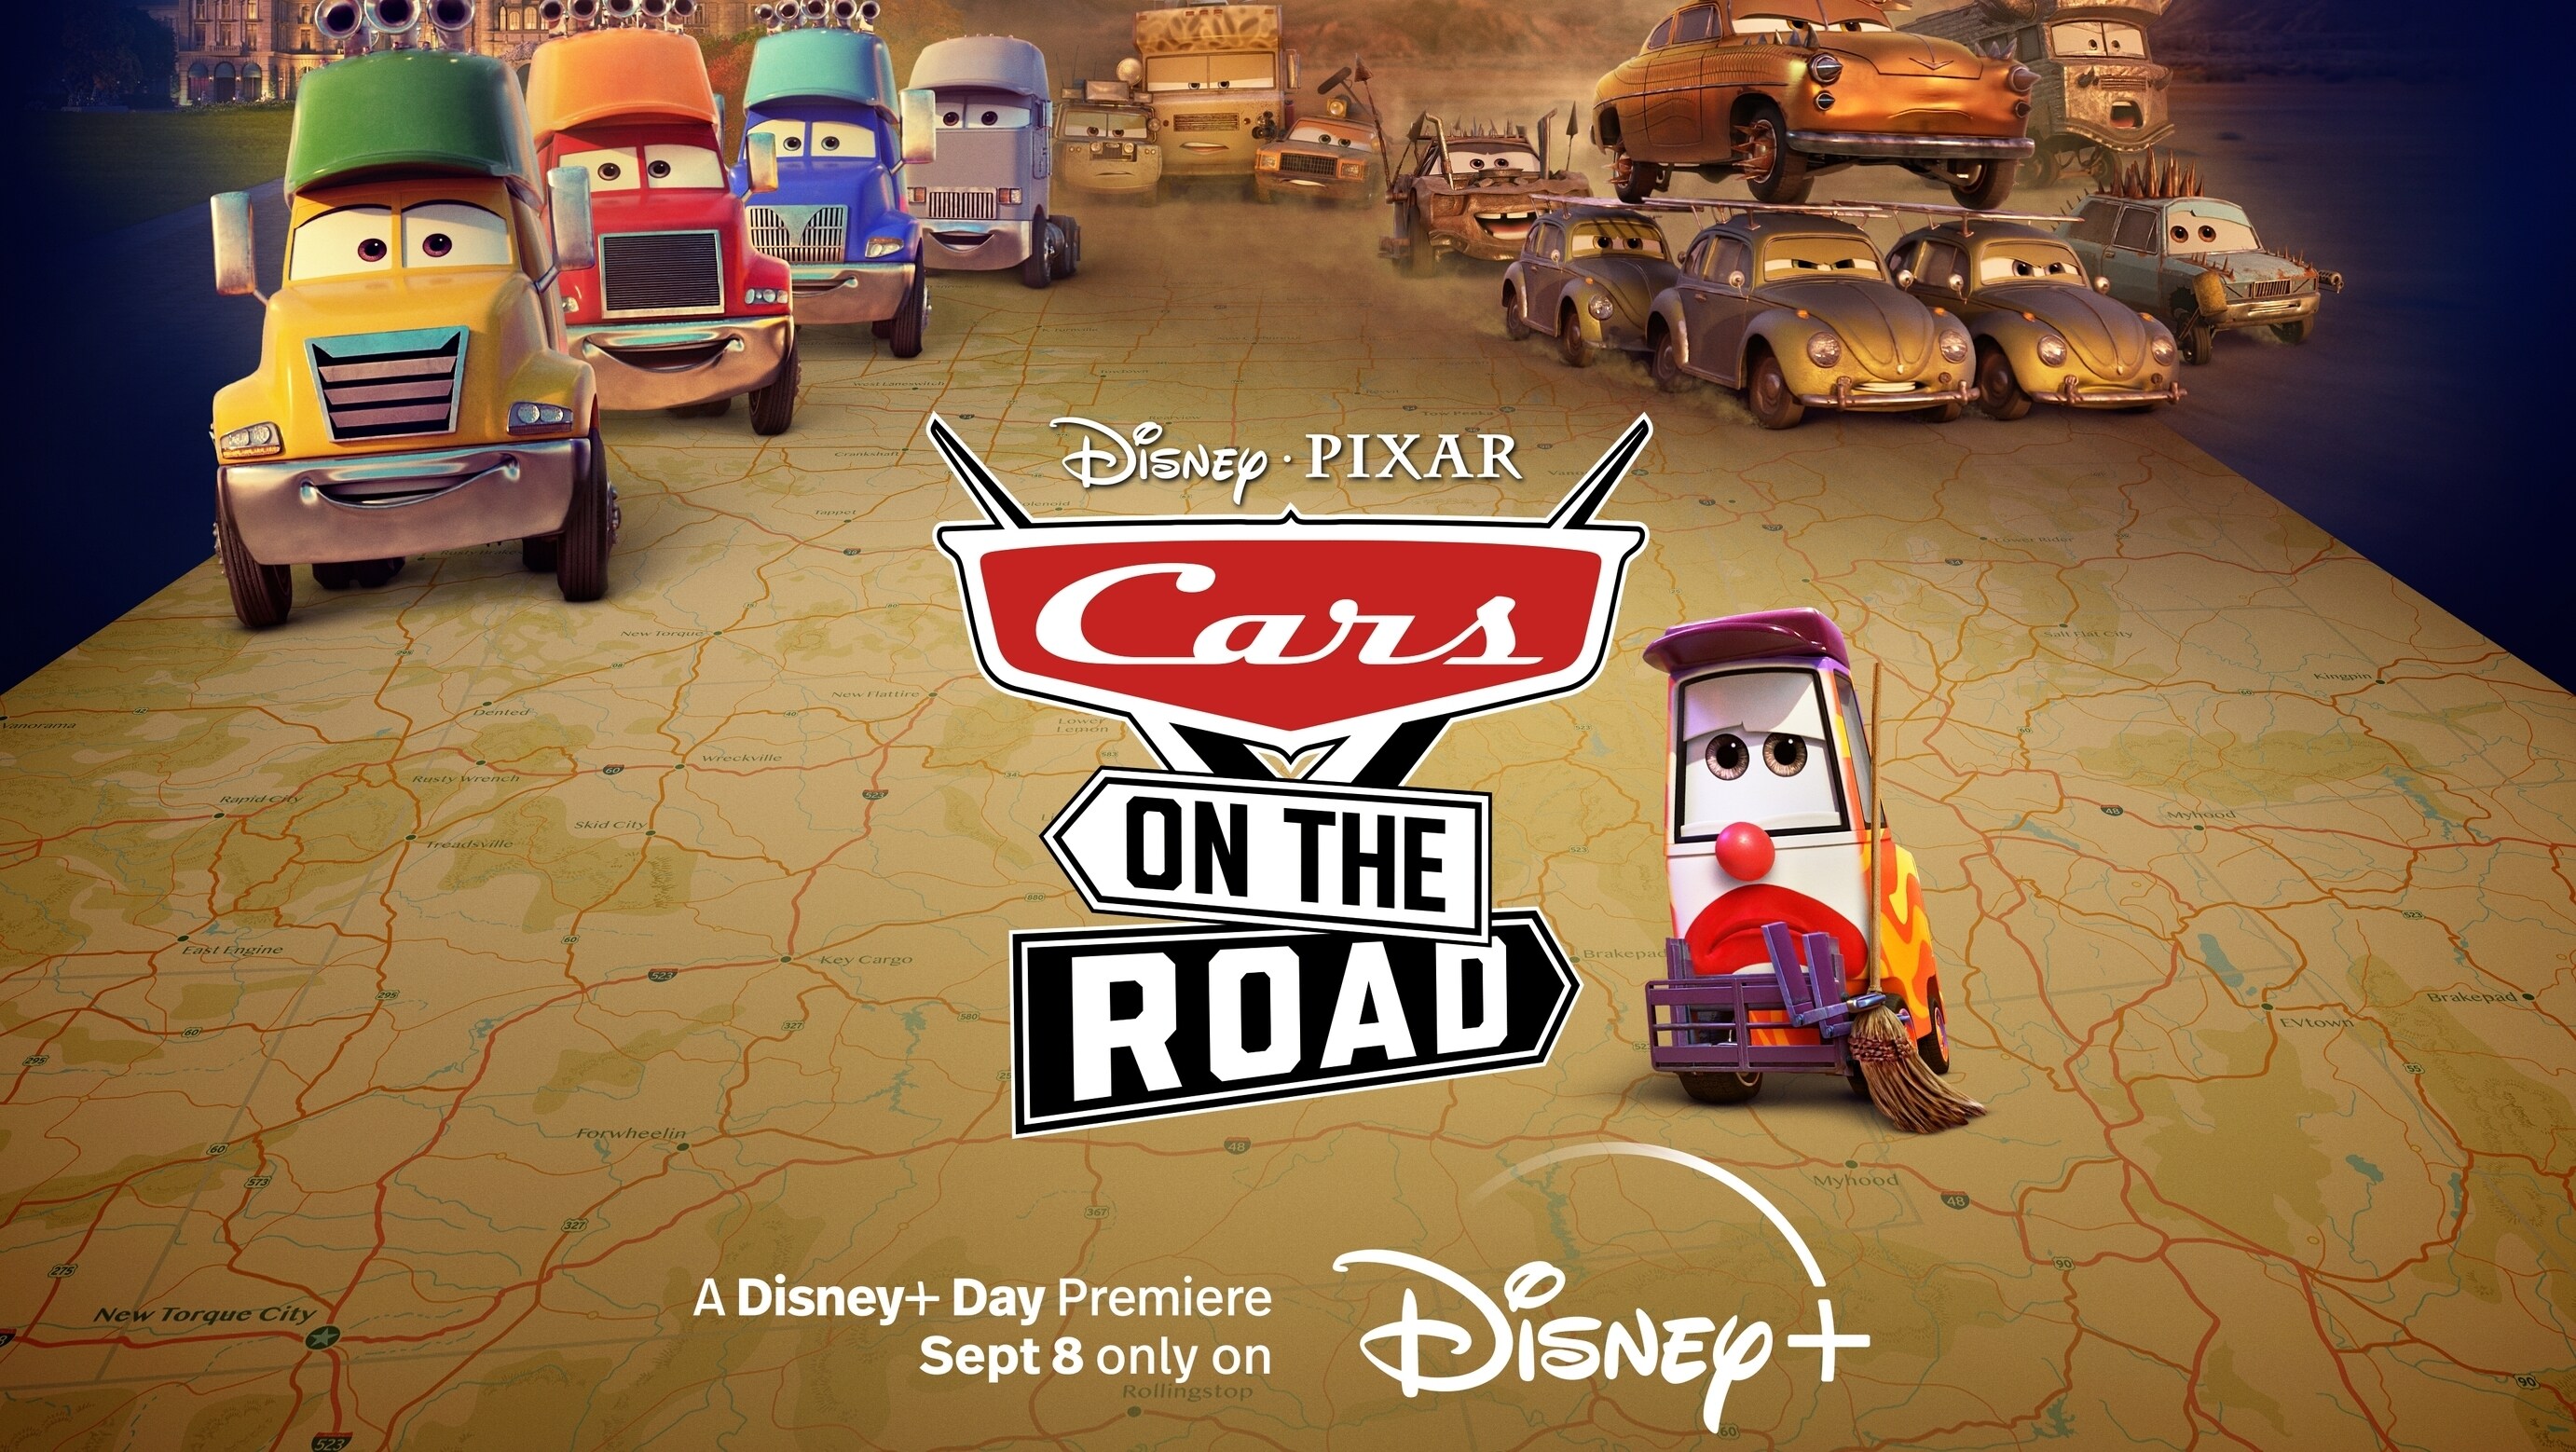 Lightning McQueen And Mater Return In The Disney+ Series Cars On The Road